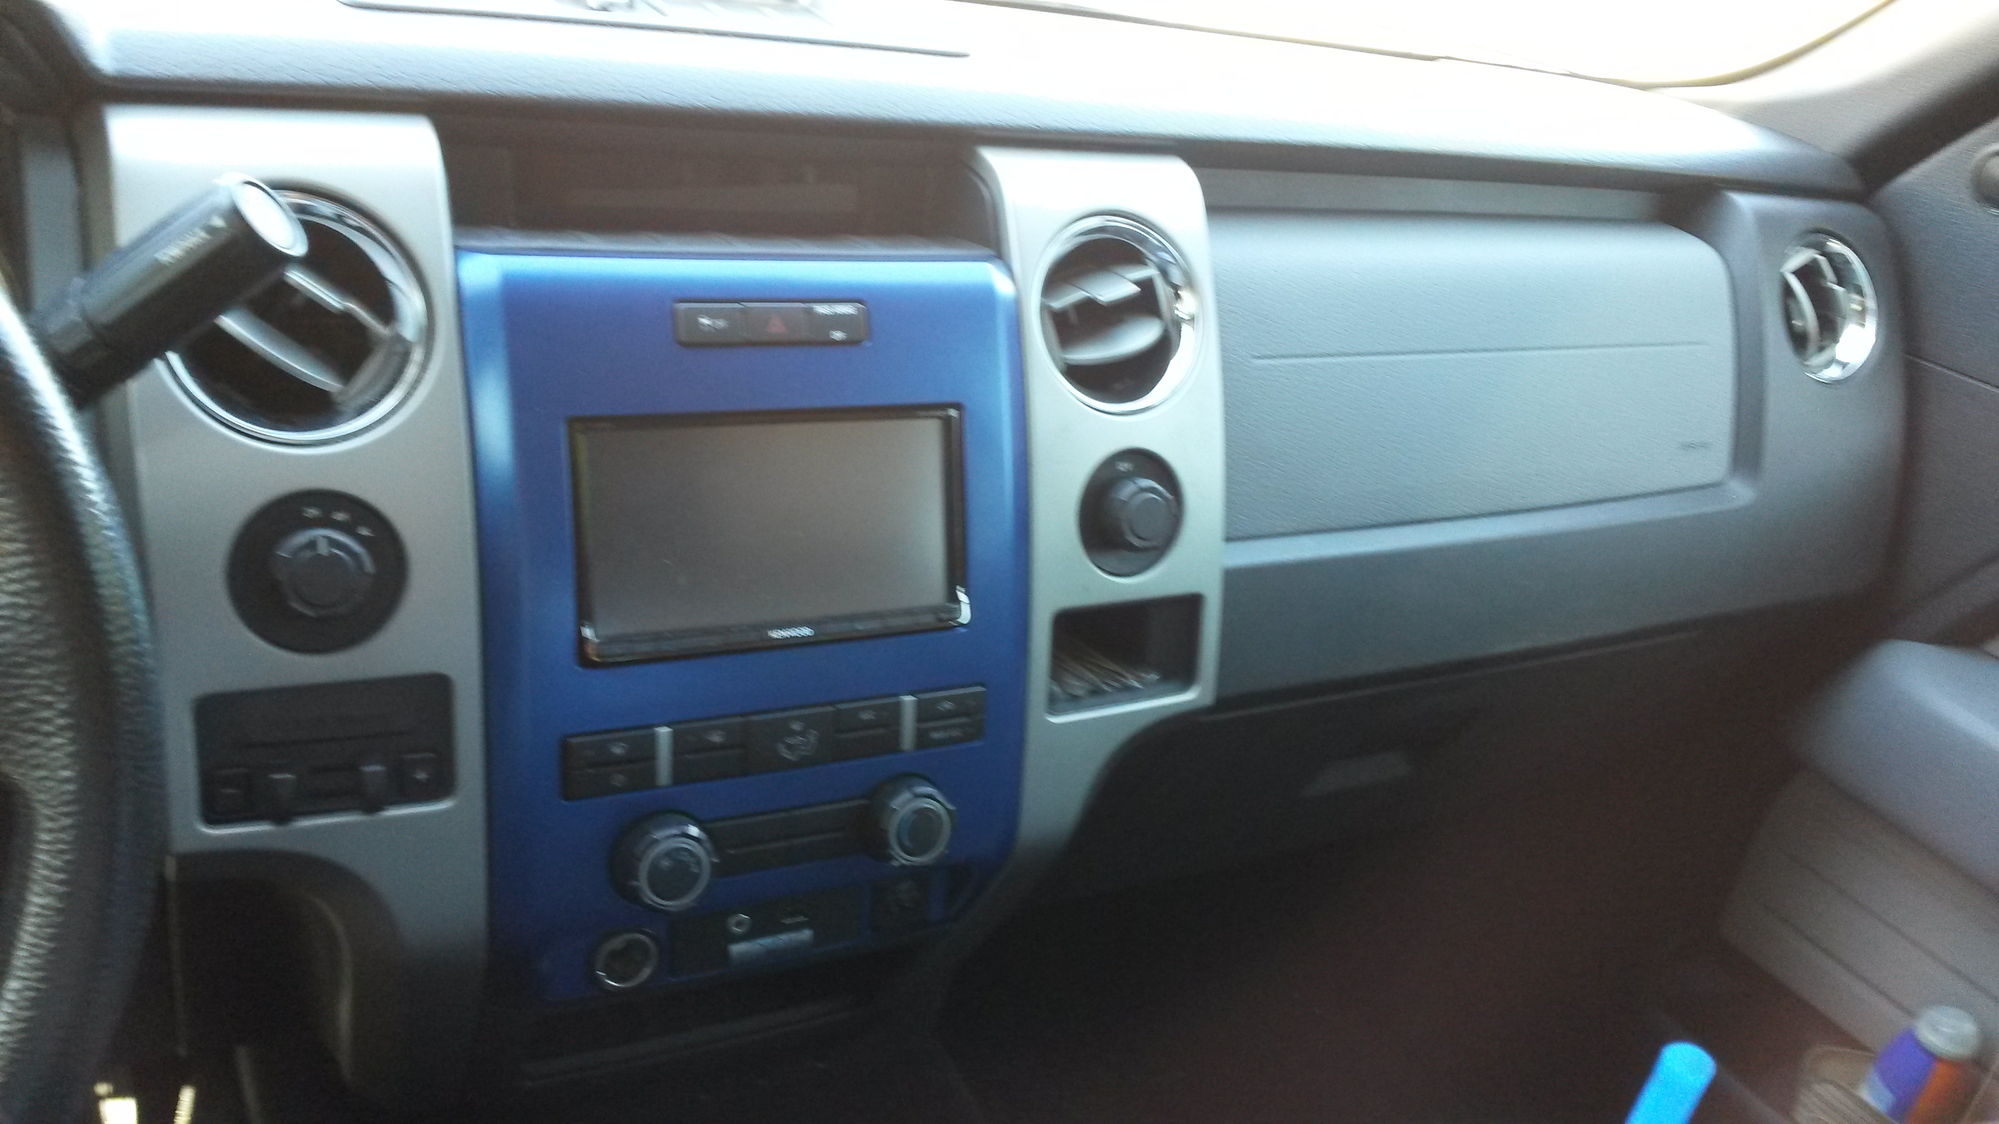 2011 ford f150 xlt stereo upgrade